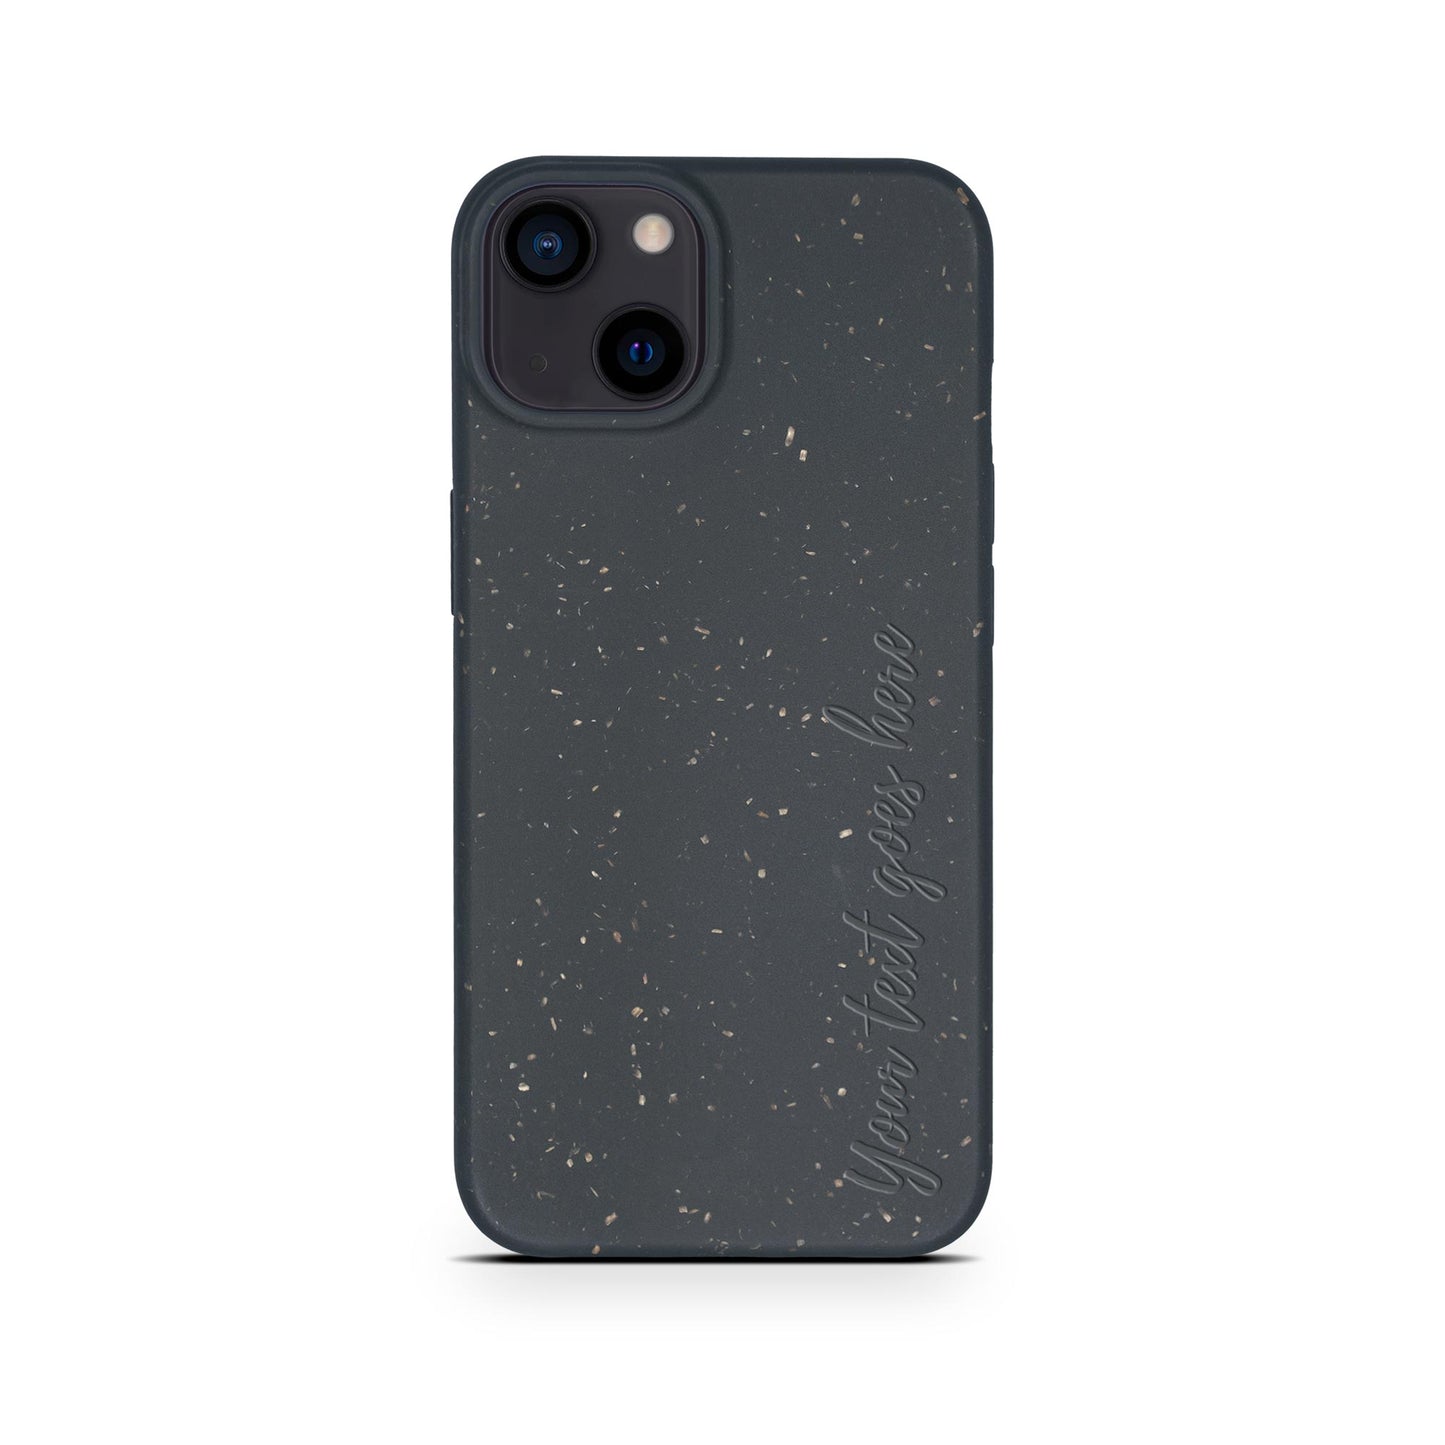 Biodegradable personalized iPhone case in black speckled with an inscription "You've got this" on a light gray background by Tan Lily.